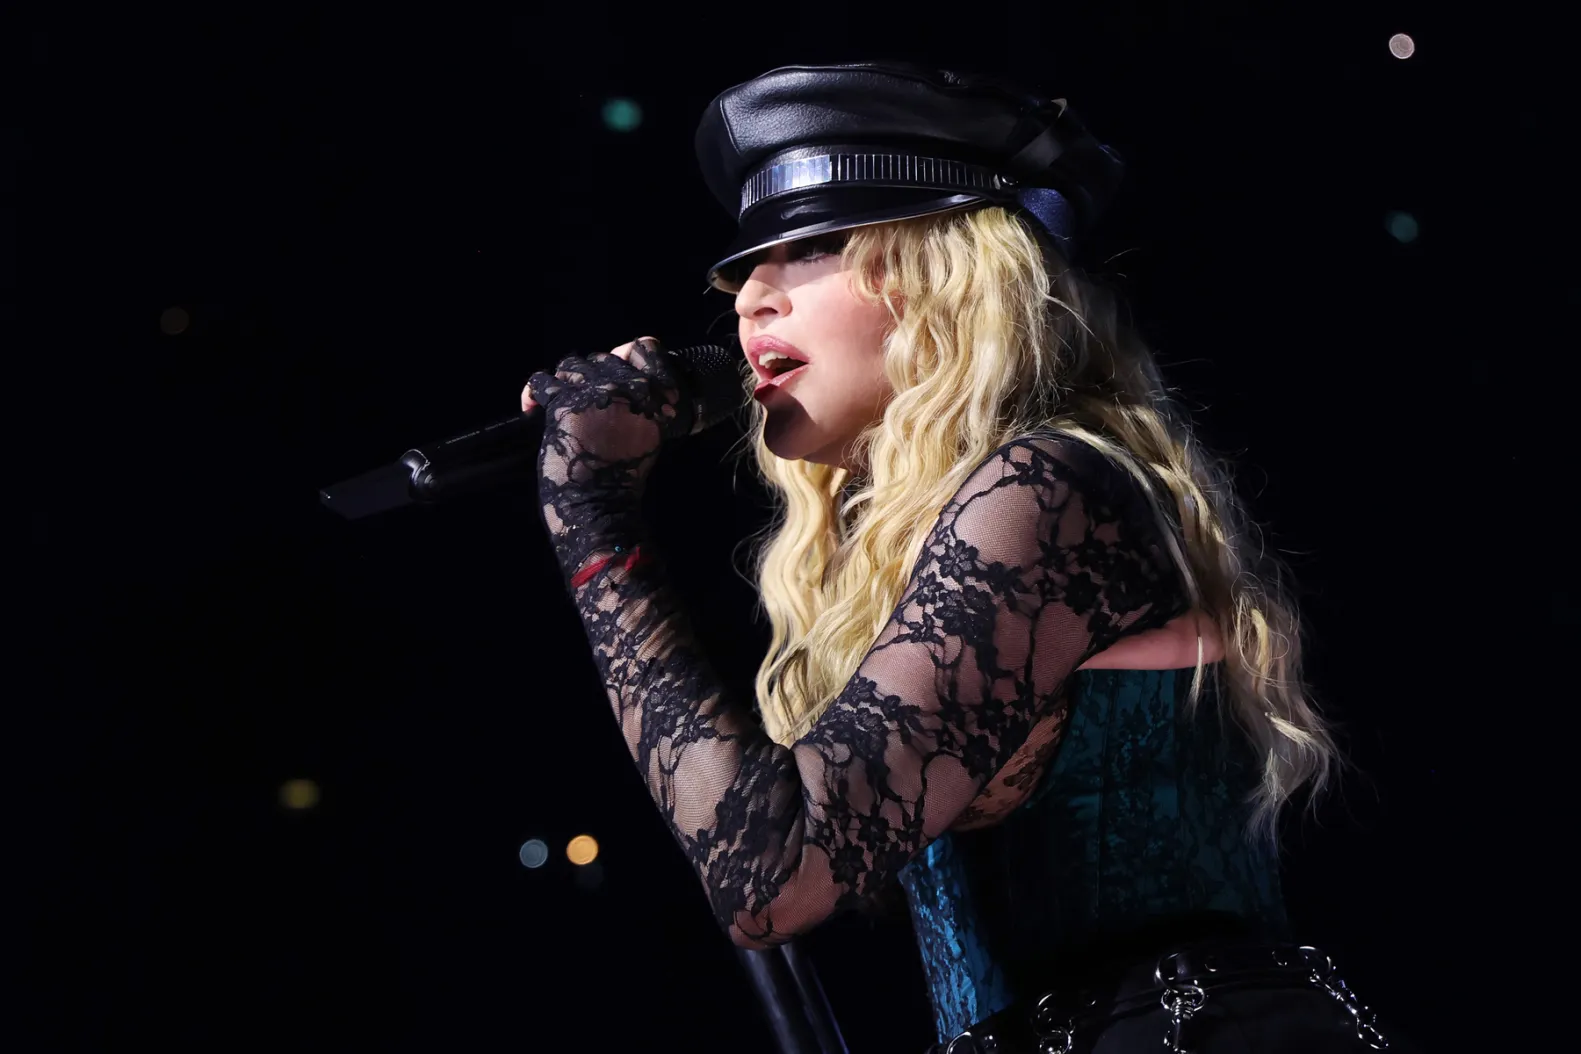 Female singer performing on stage with microphone in black lace outfit and leather hat.